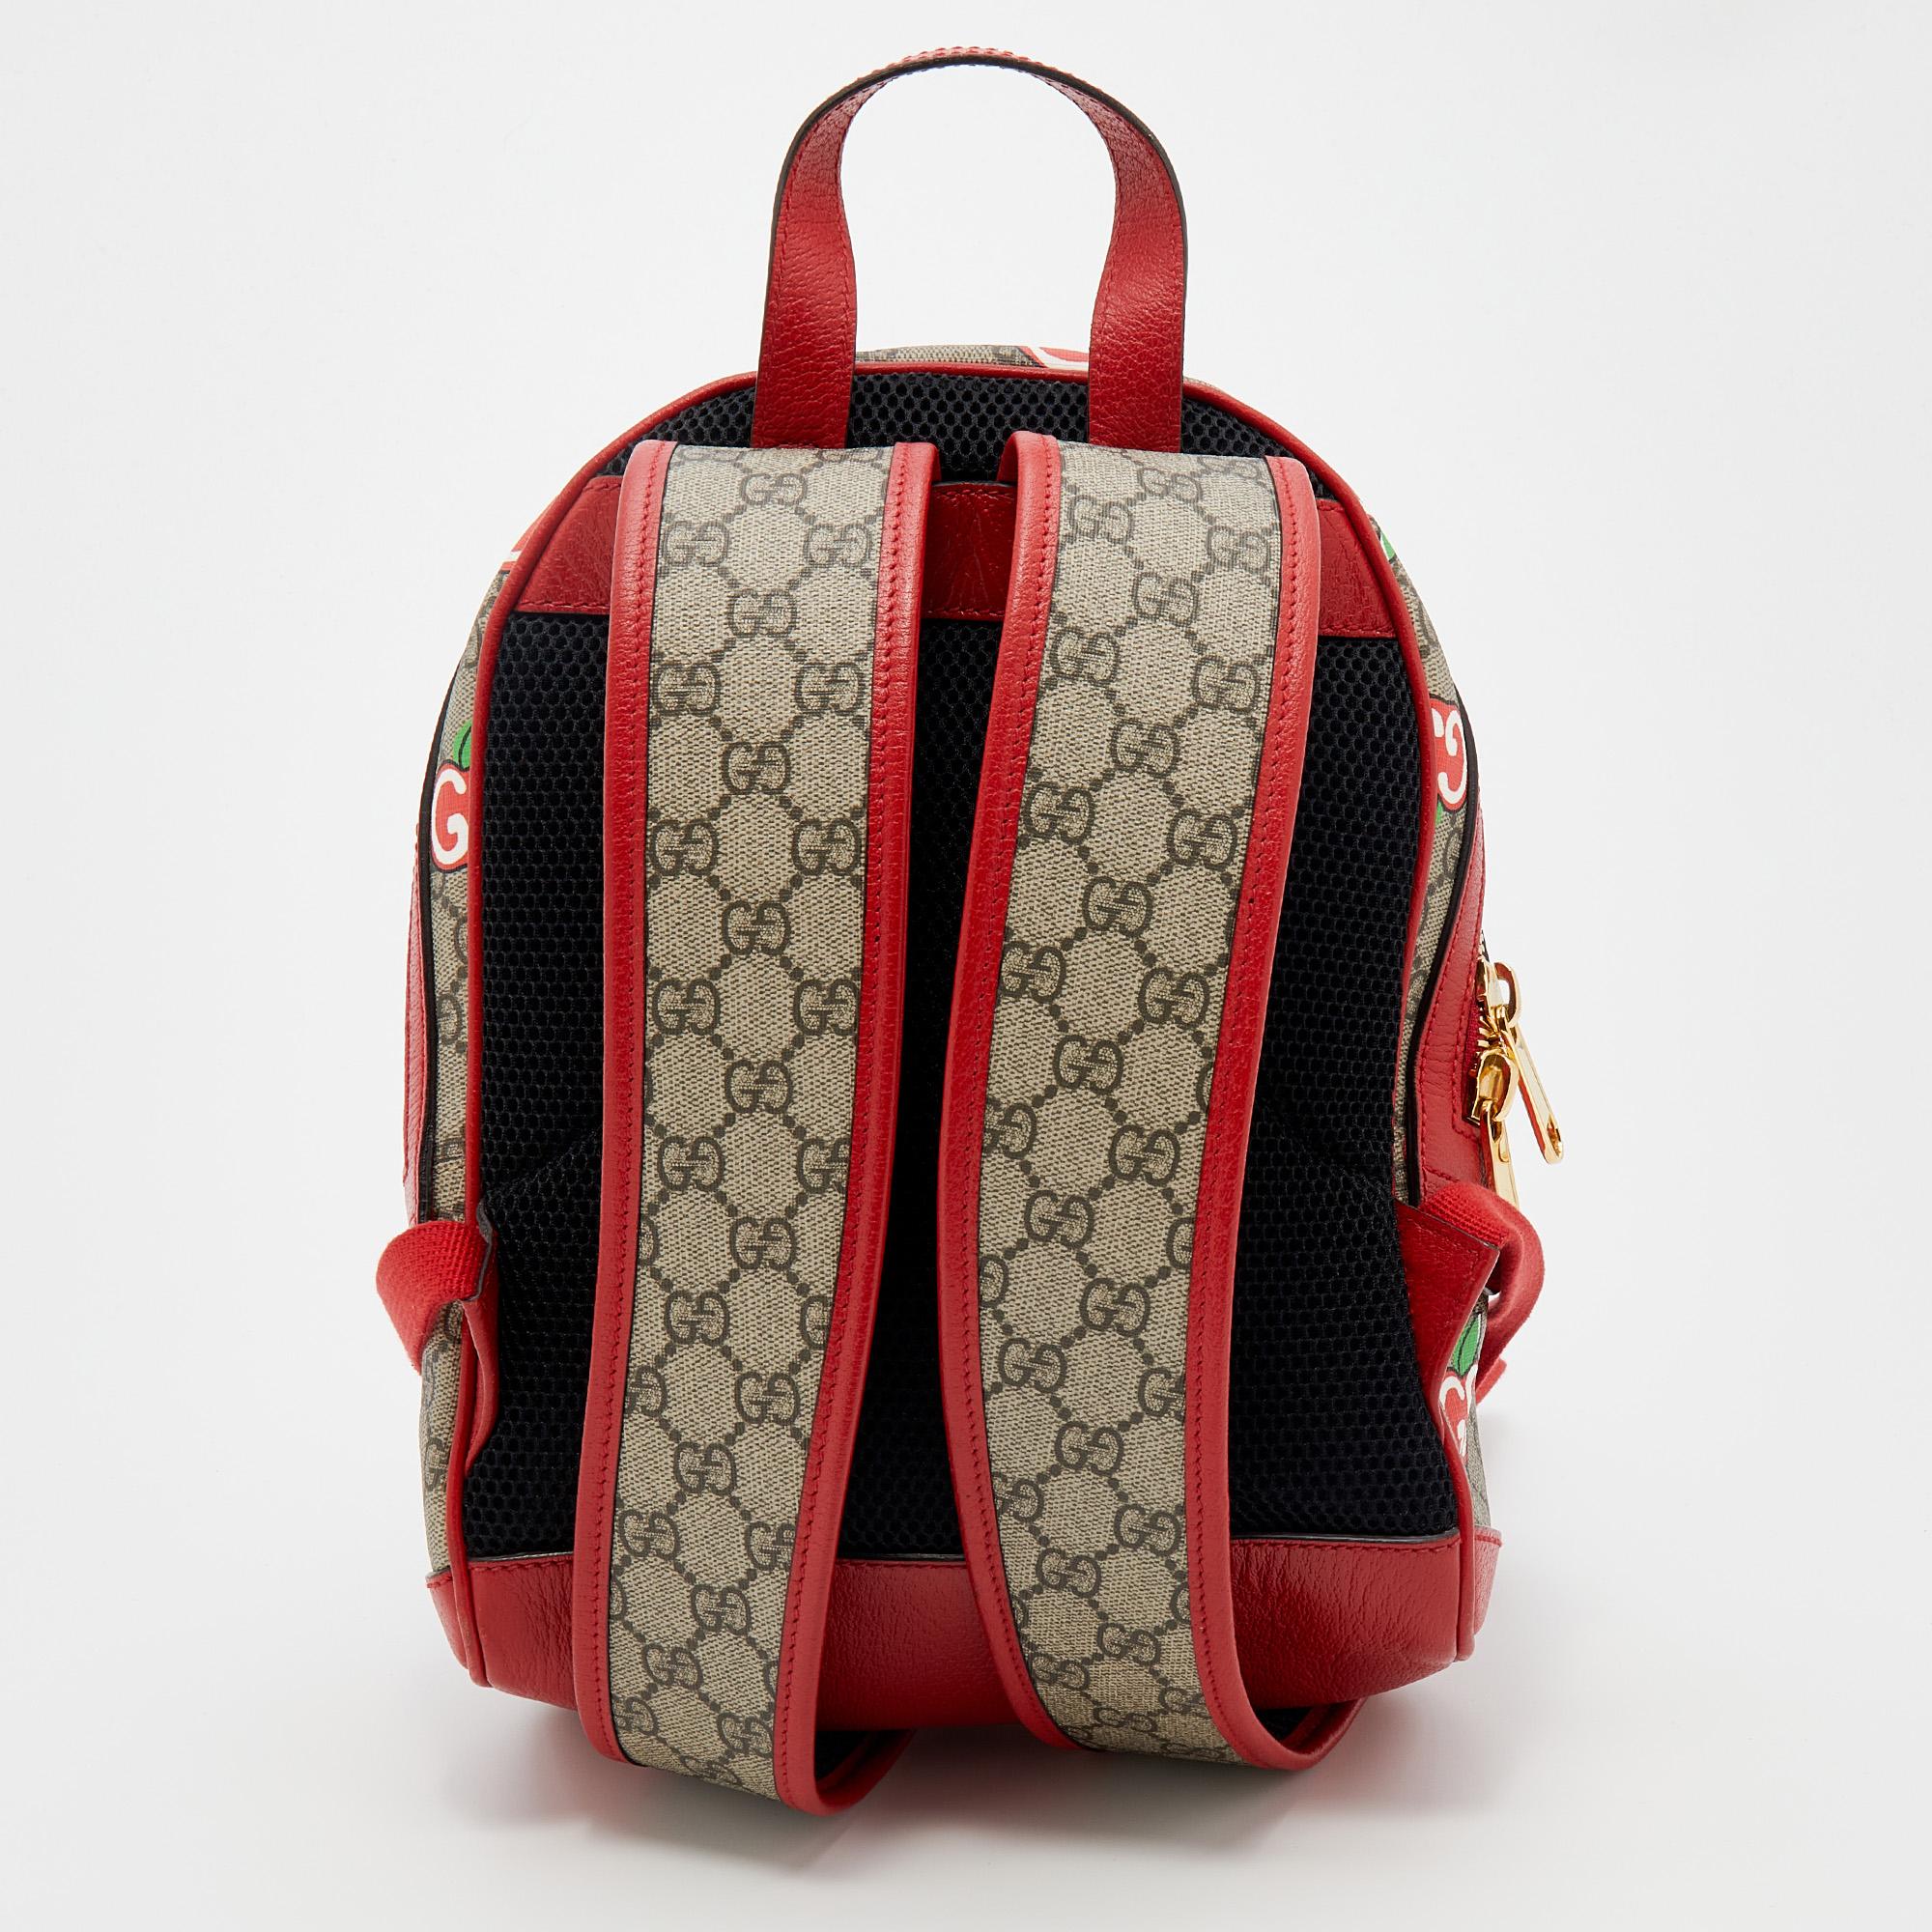 Created from GG Supreme canvas and leather, this pretty backpack features signature details, gold-tone hardware, and two shoulder straps. The front pocket and a spacious canvas interior make this Gucci backpack ideal for long travels and daily